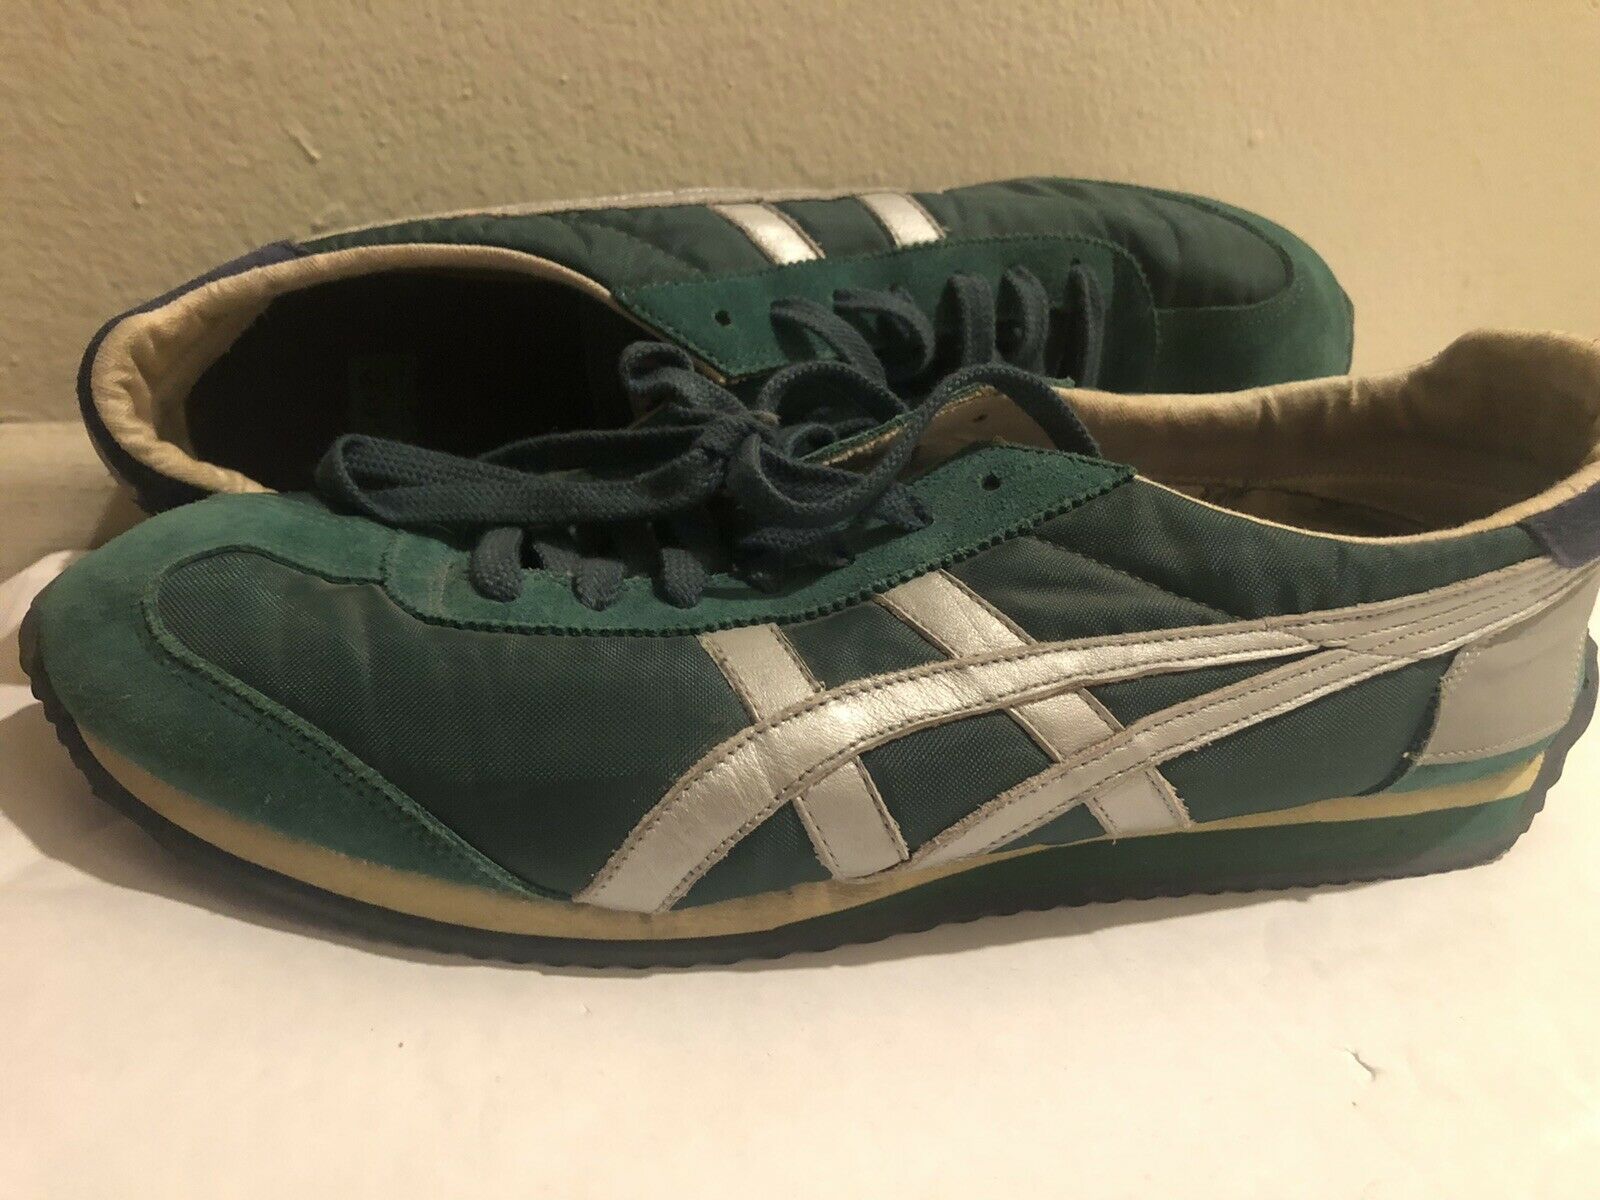 Onitsuka Tiger Men's Size 9.5 Green With Silver Strip Low Lace Up Shoes D110N